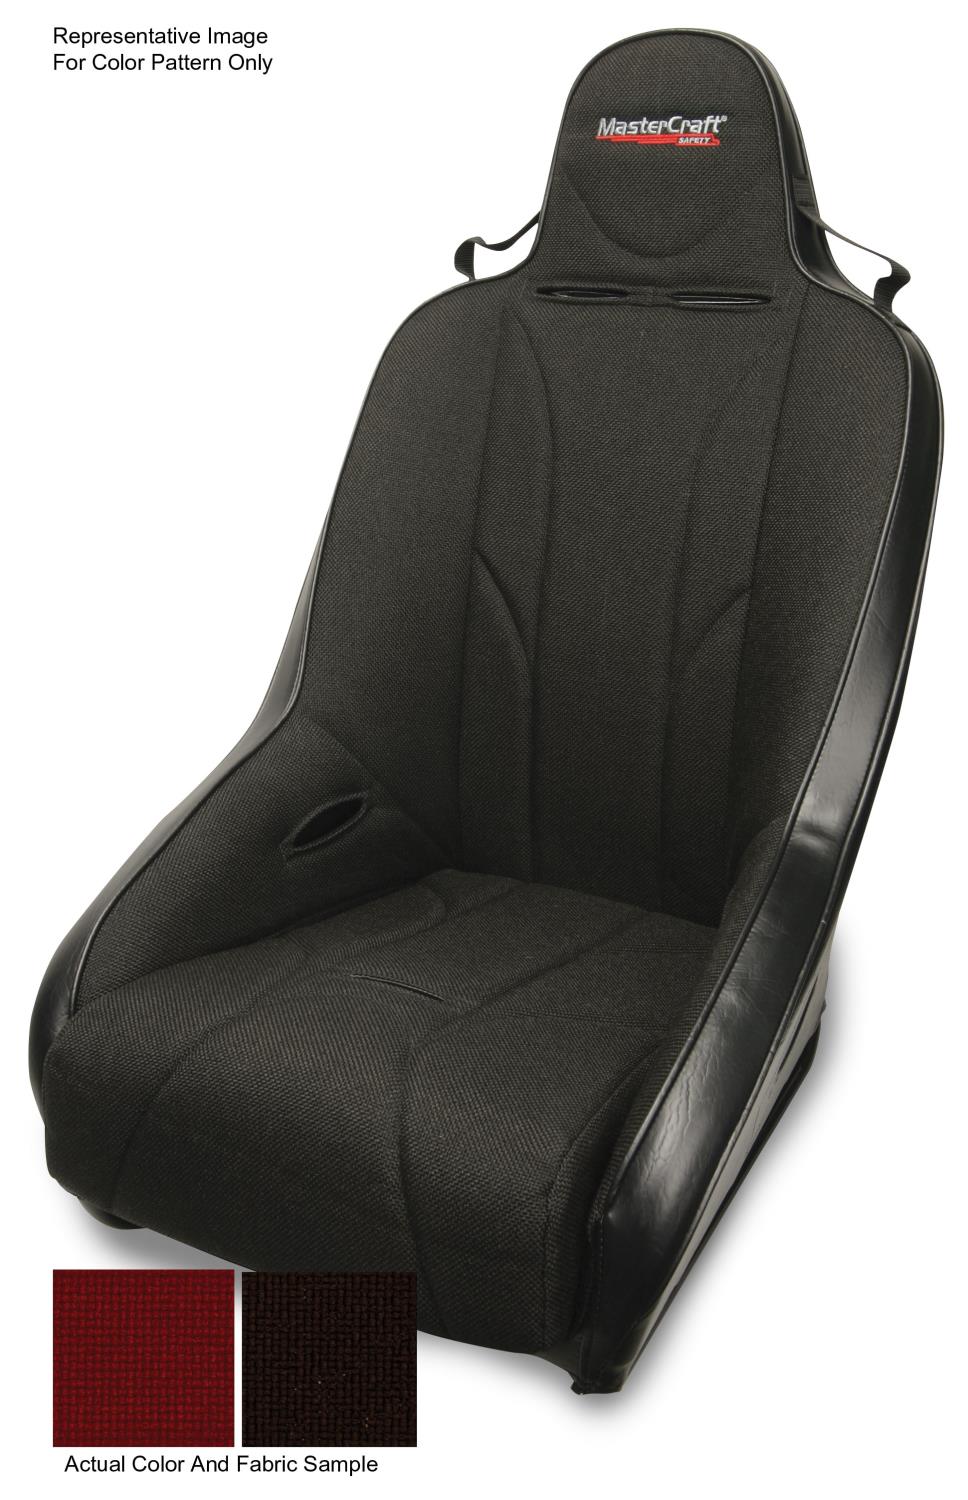 561112 1 in. WIDER PROSeat w/Fixed Headrest, Black with Black Fabric Removable Cushion, Red Side Panels, Black Band